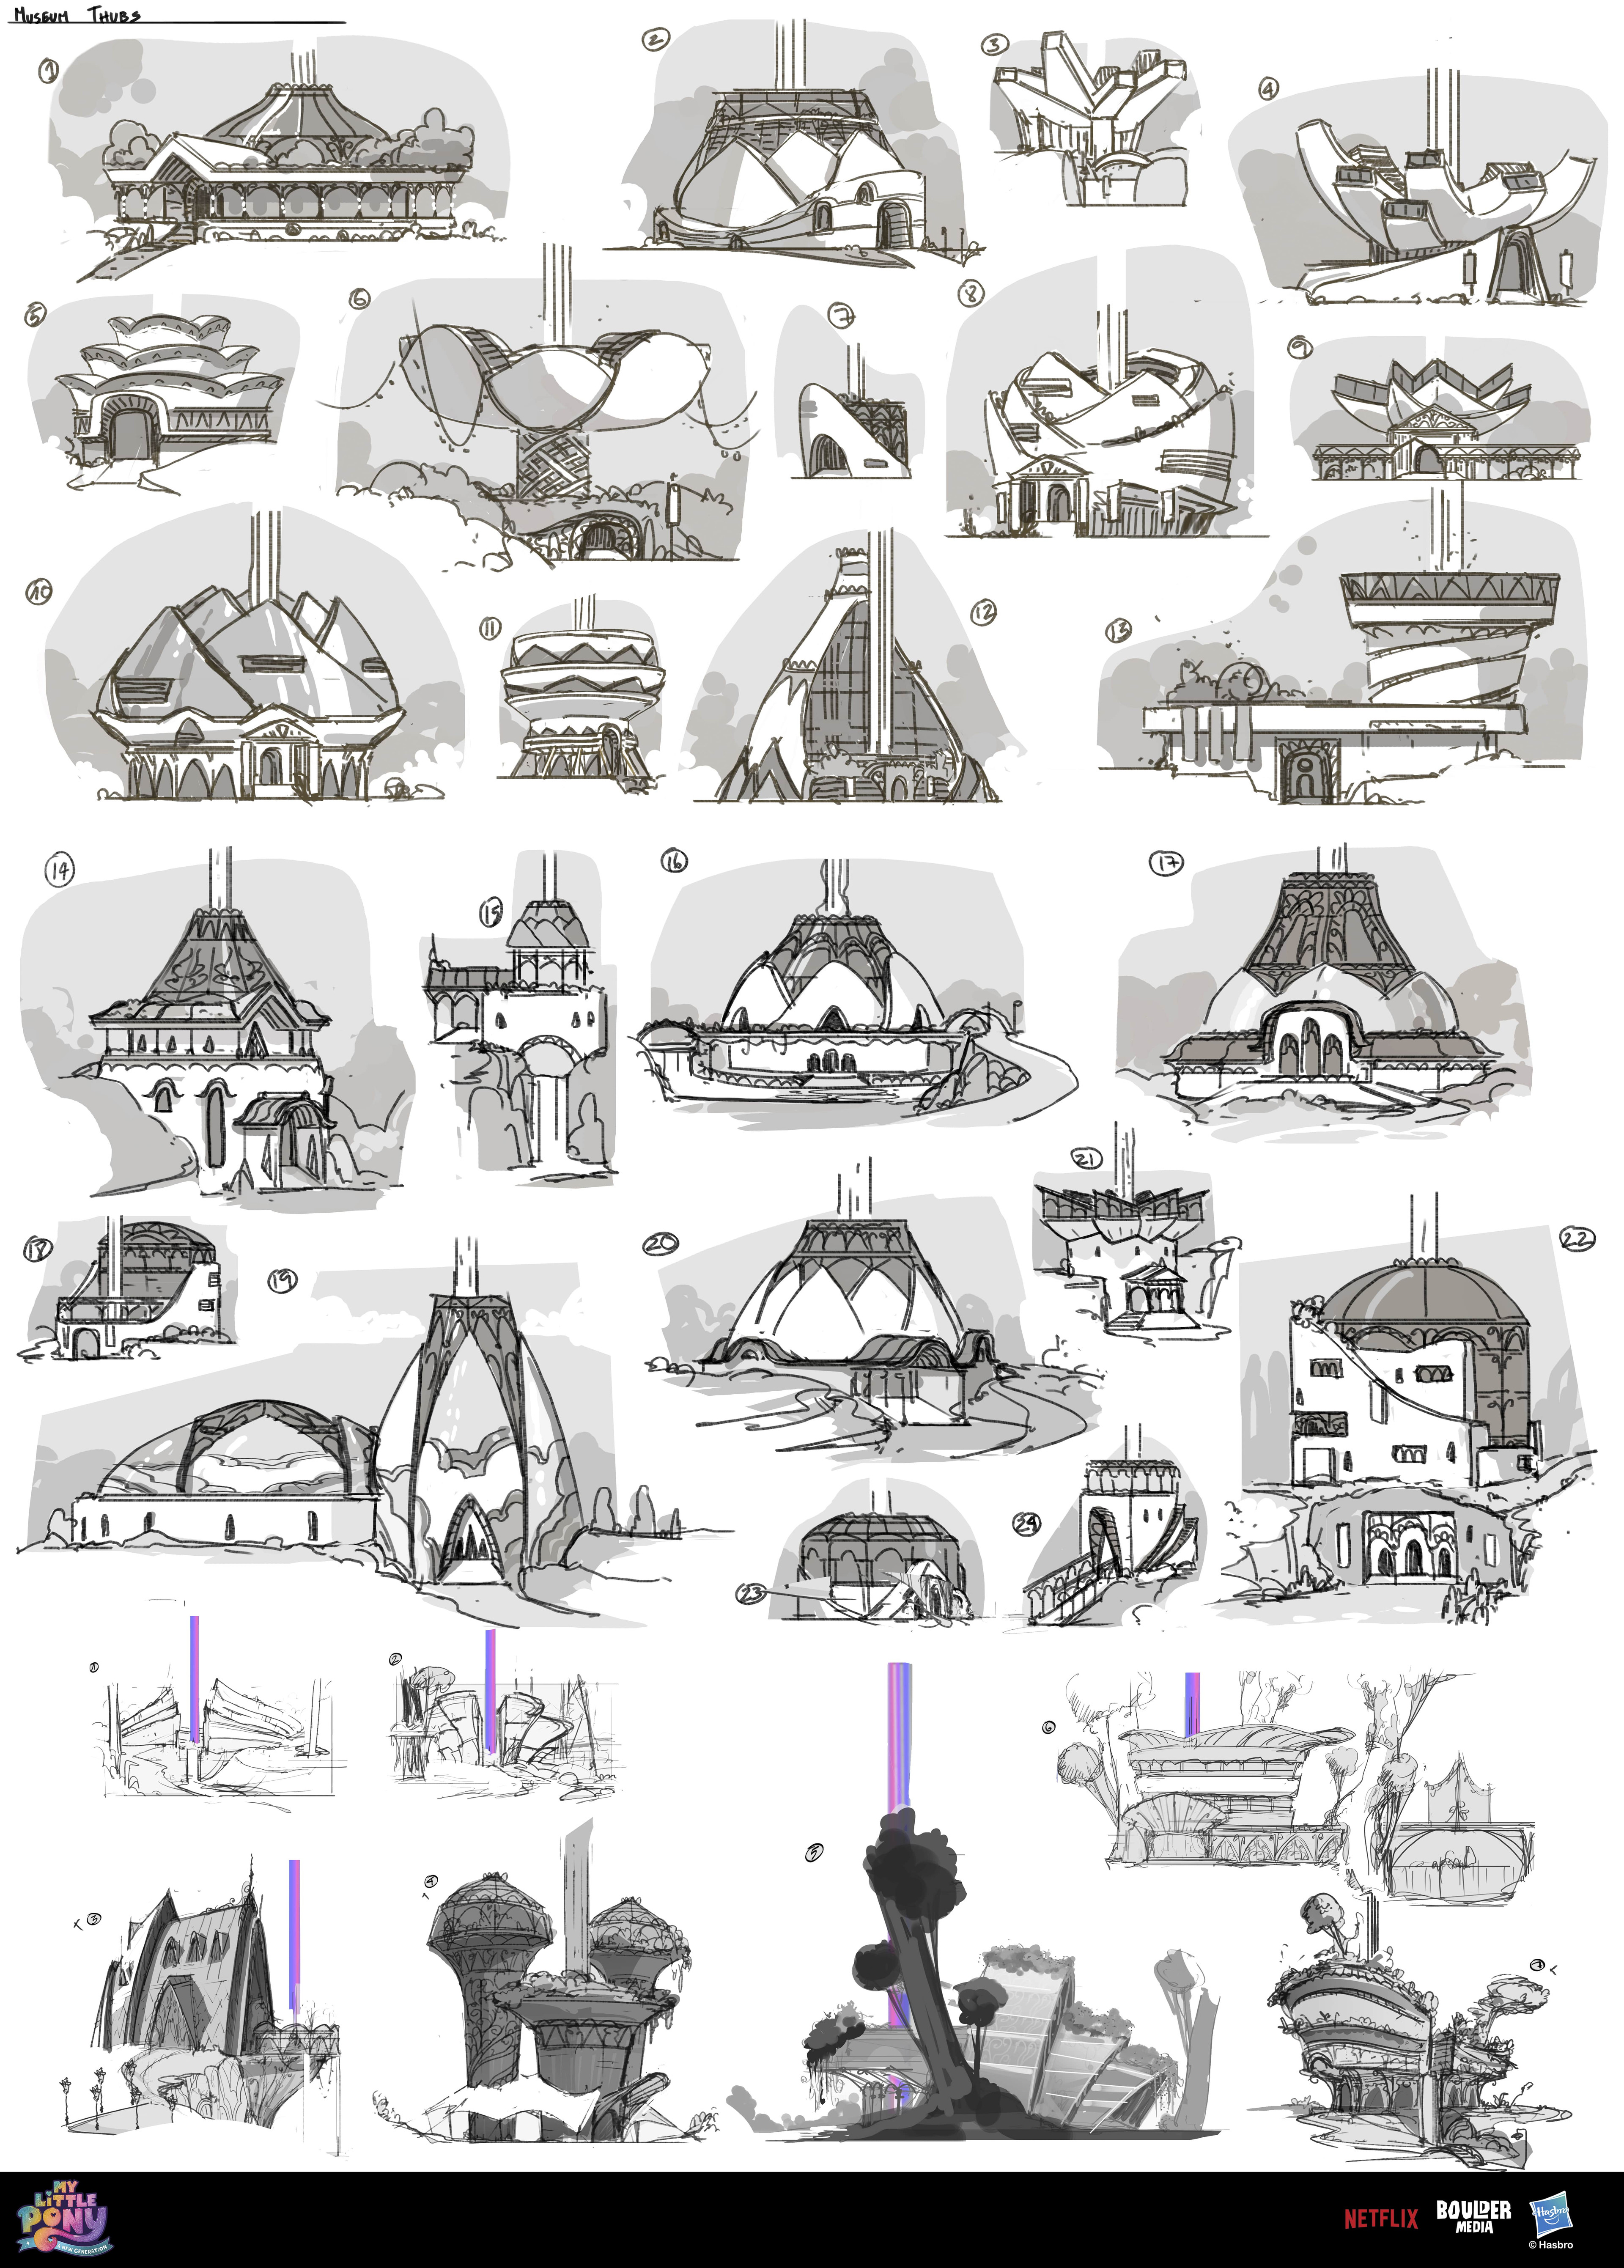 There was a museum at one point in the story. These are some thumbnail explorations for it.